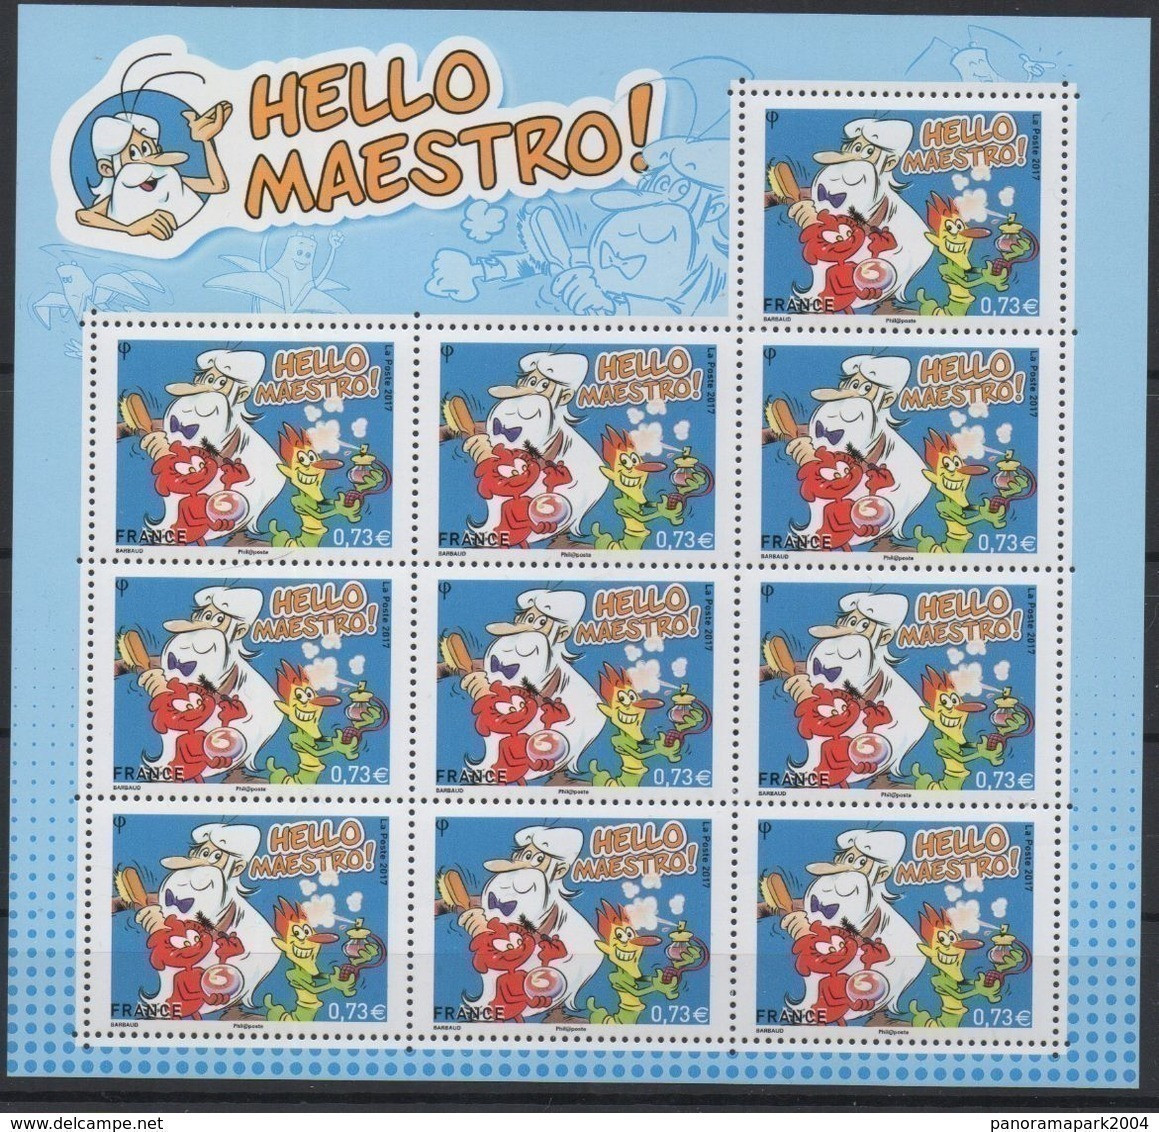 France 2017 - BF YT N°139 Mini-feuillet Bloc 10 Timbres Hello Maestro LUXE MNH RARE ! Tirage 30 000 - Mint/Hinged